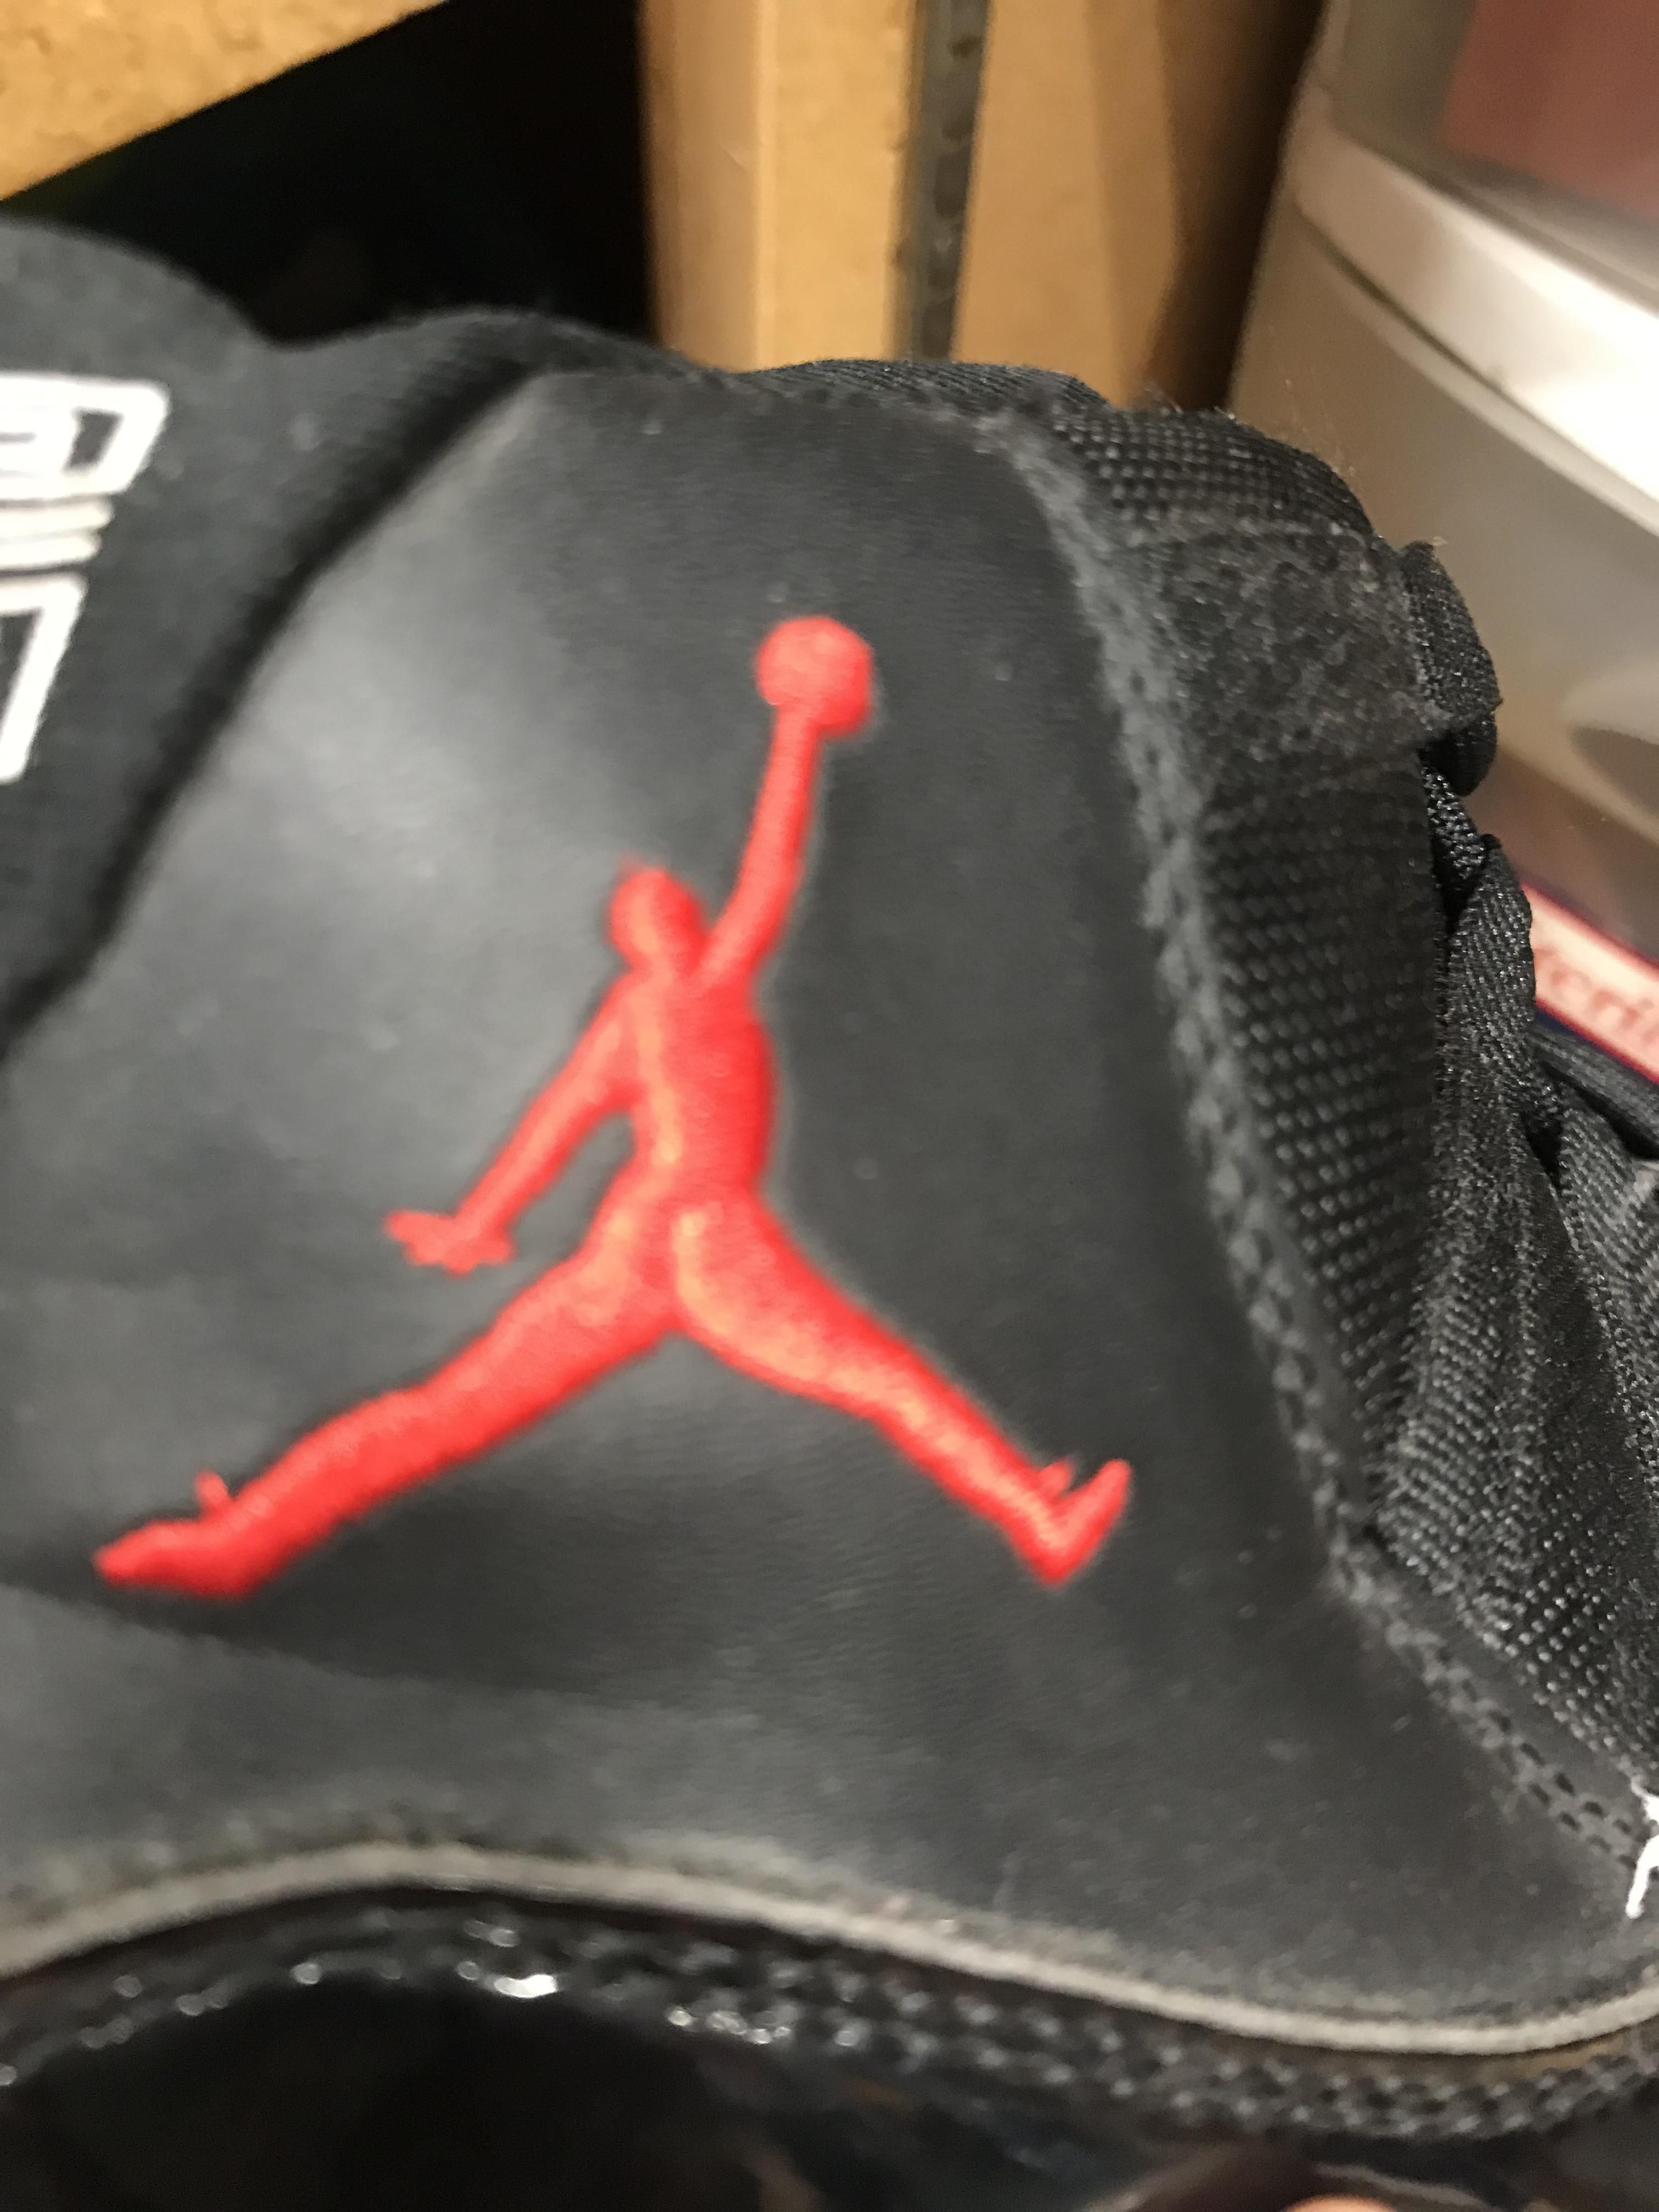 The booty on the logo of these fake Jordans